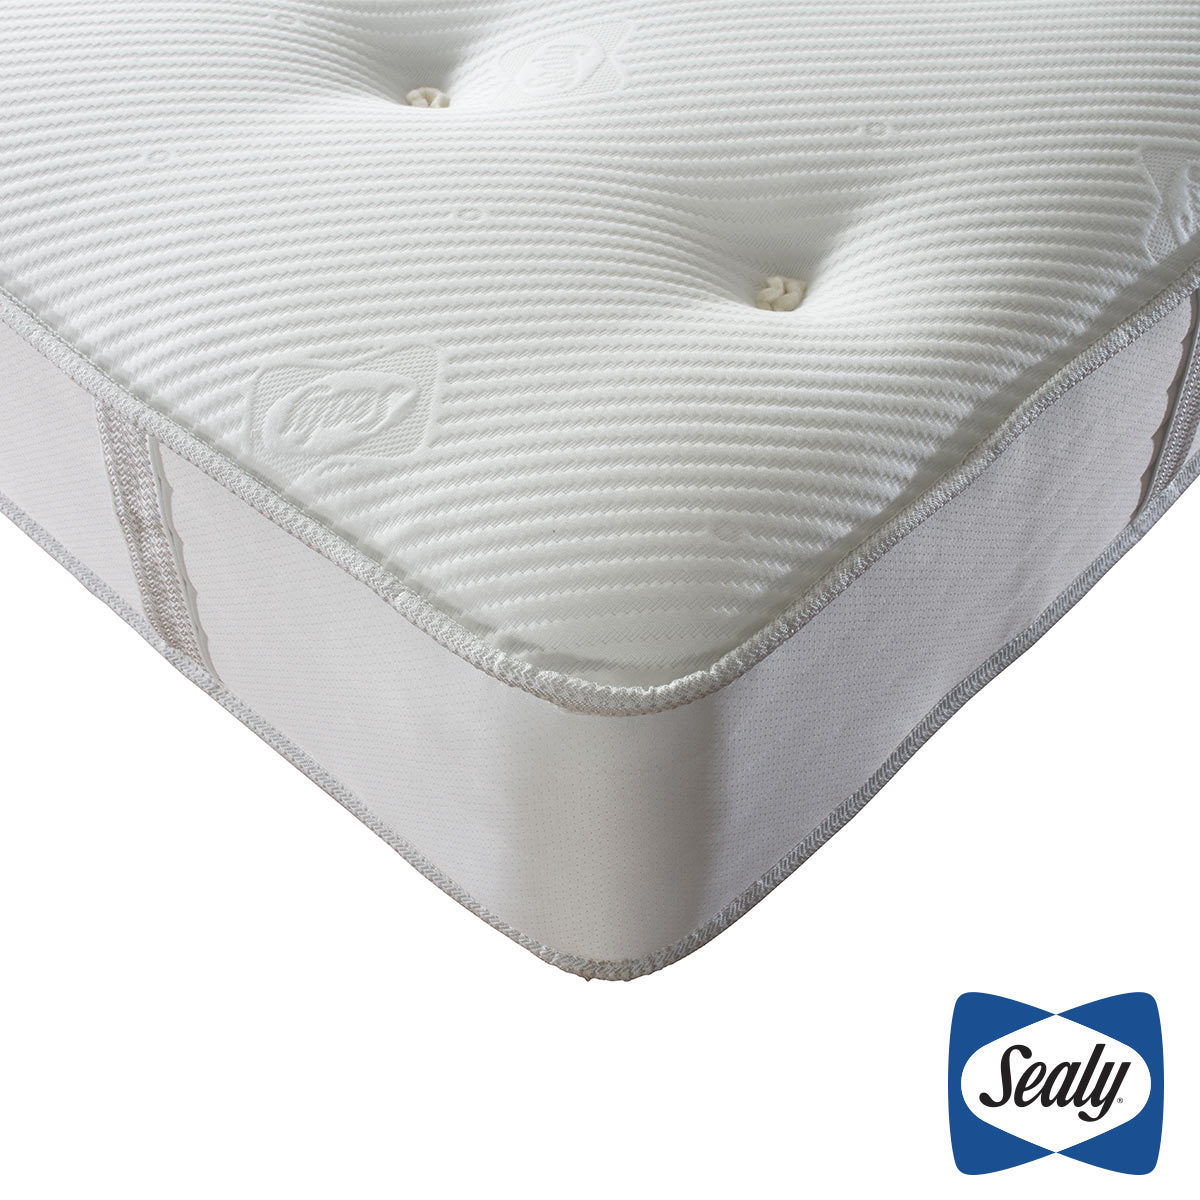 Sealy 1000 Deluxe Pocket Memory Tufted Mattress, King